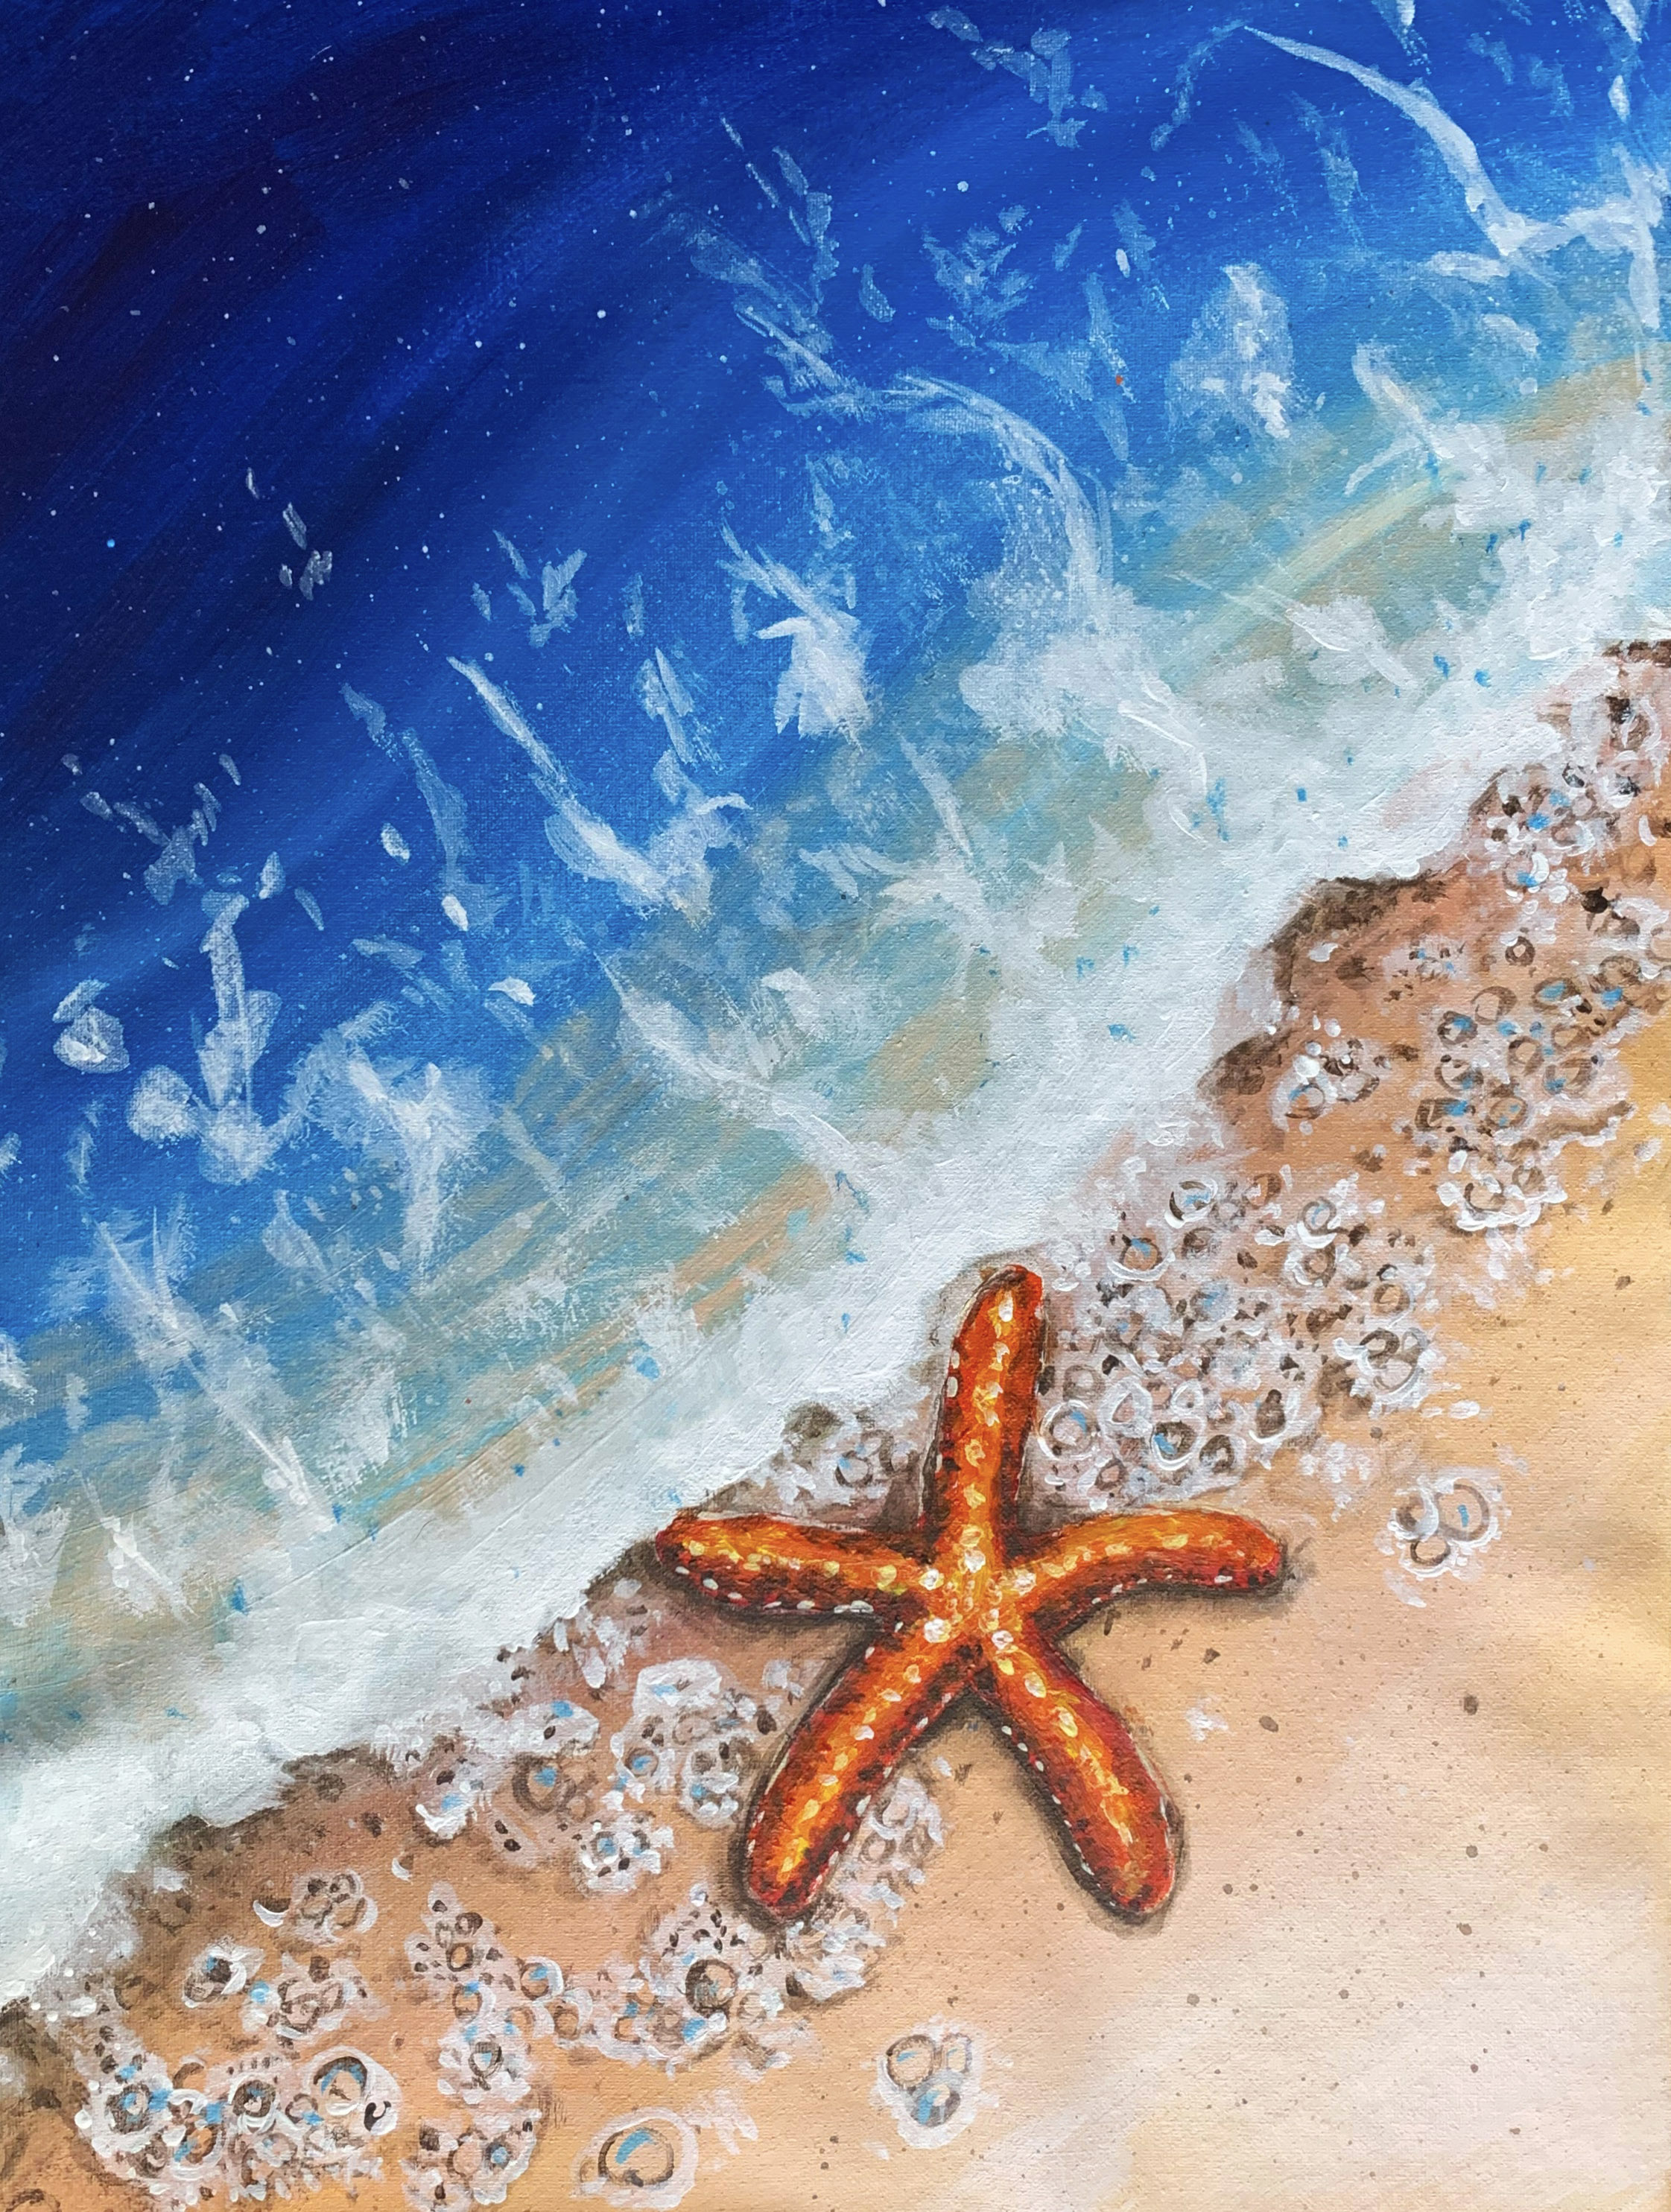 A Starry Beach experience project by Yaymaker